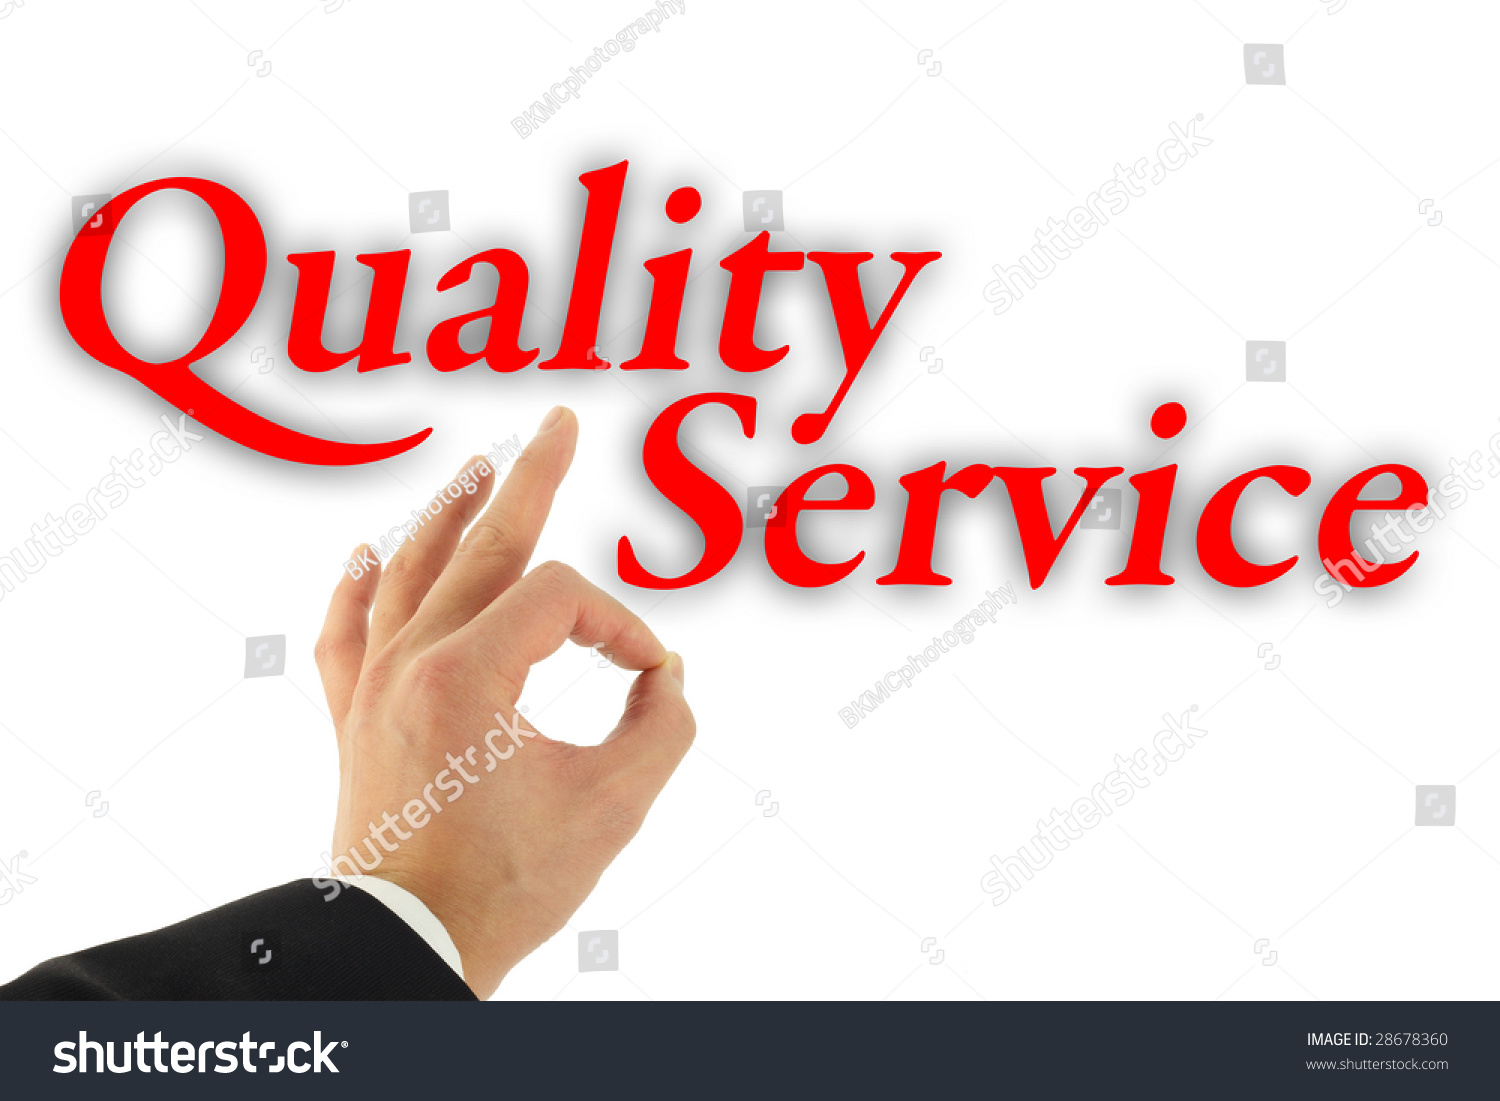 Quality service concept with hand okay sign isolated on white #28678360